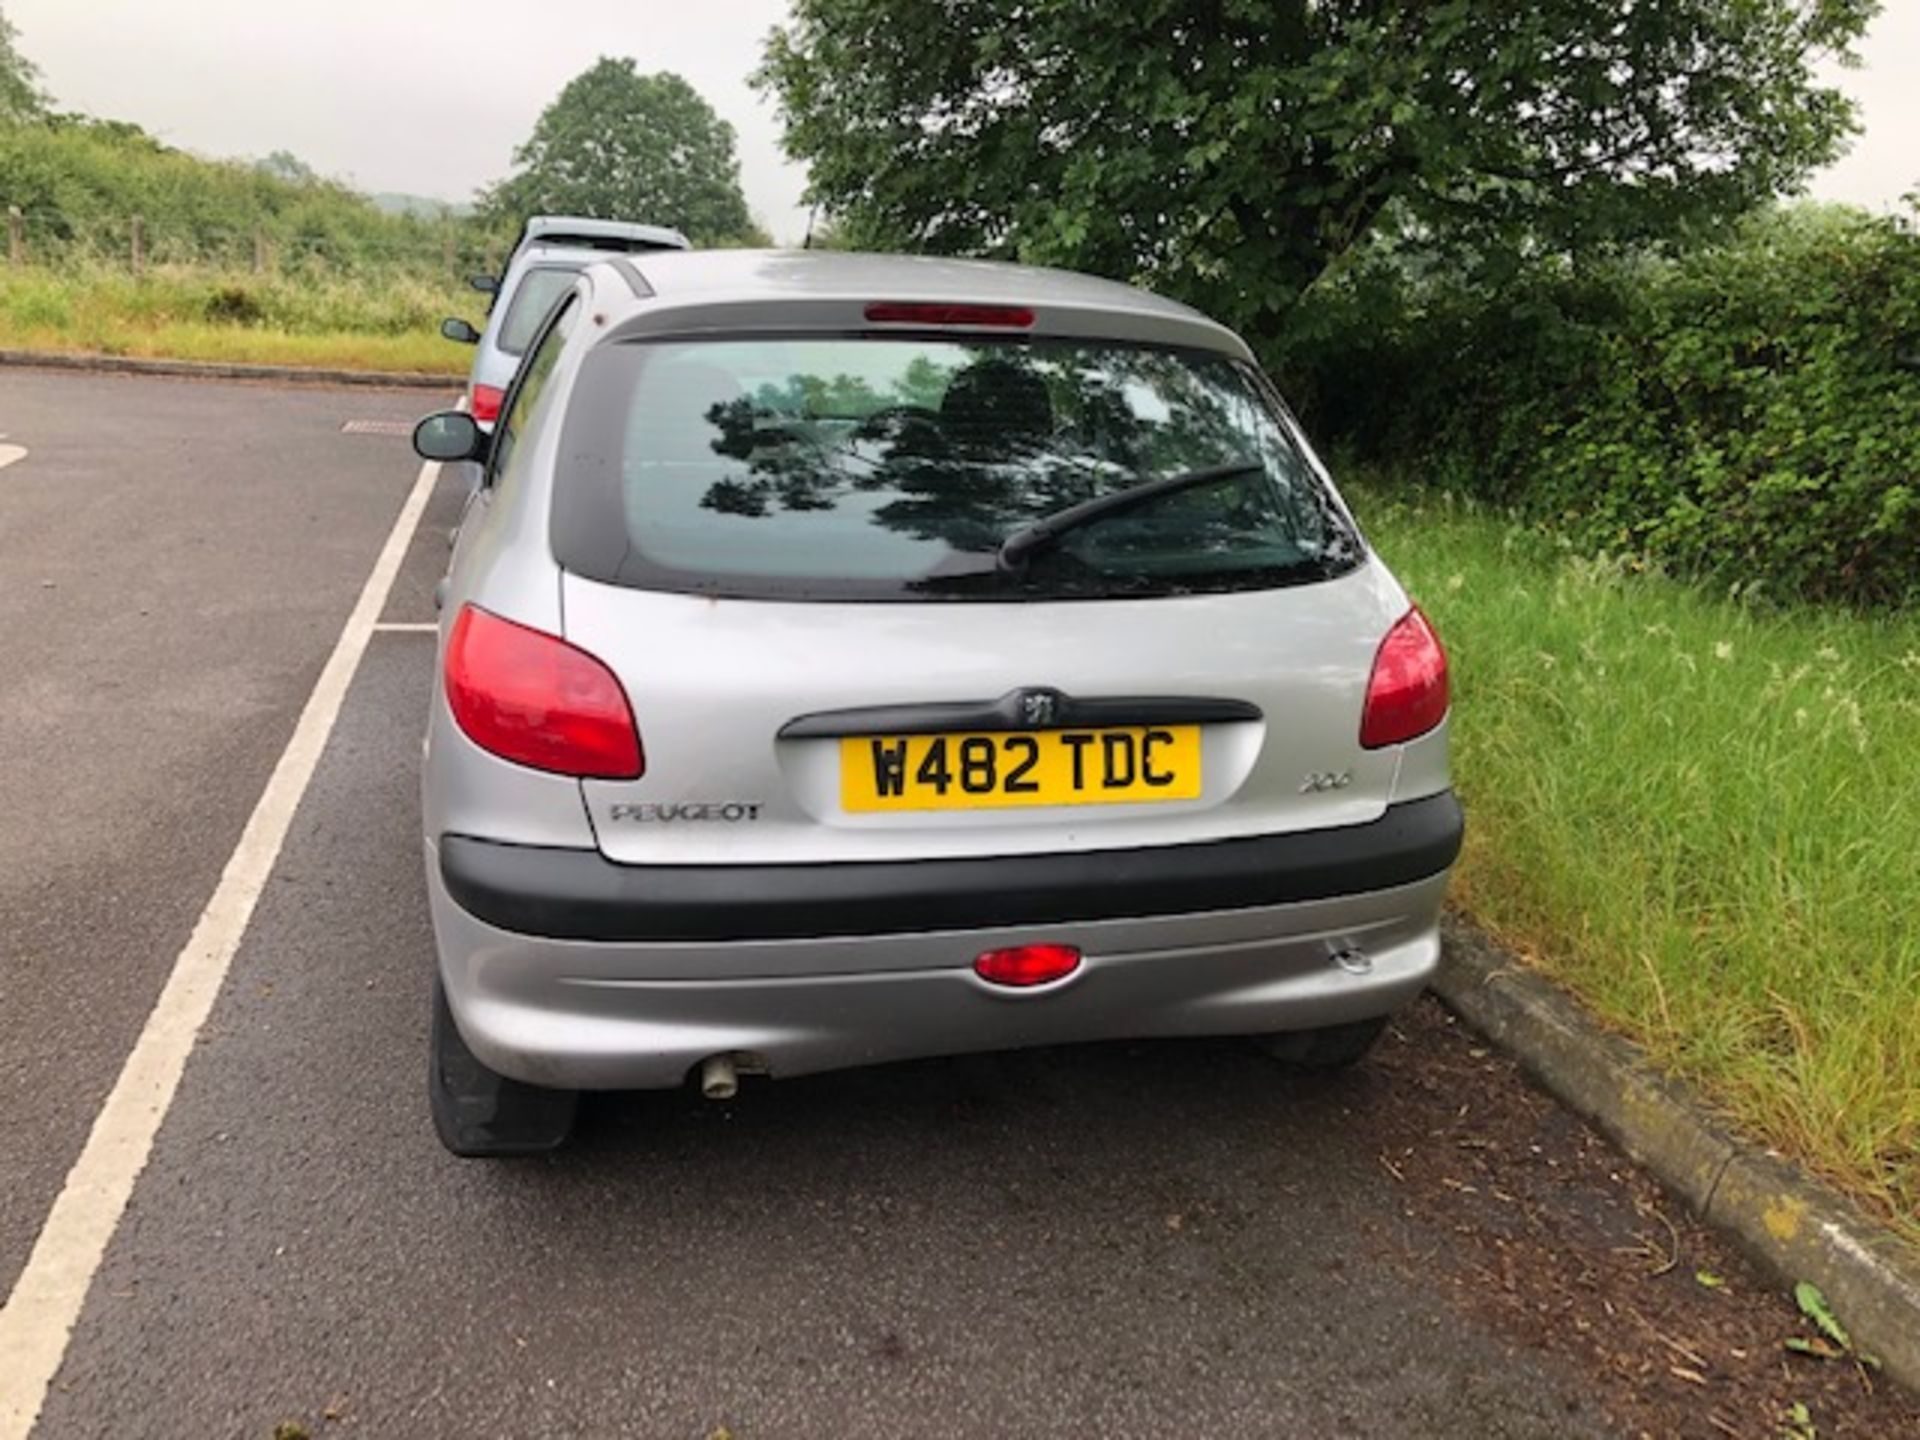 Peugeot 206 Reg No W482 TDC. We have the V5 and keys, the vehicle doesn't run, appears to be - Image 3 of 6